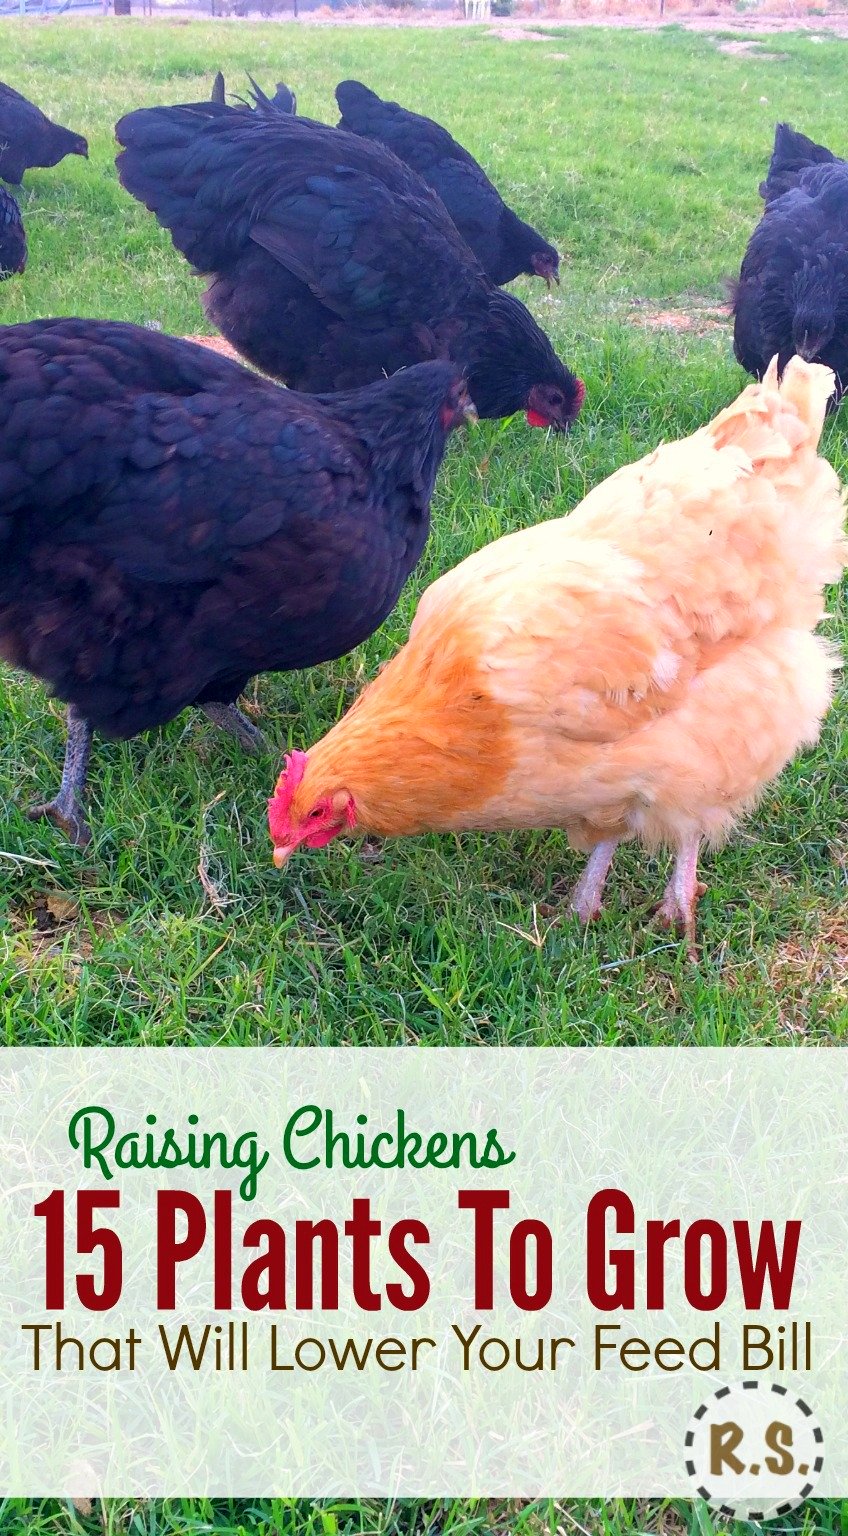 Grow your backyard chicken food in a DIY perennial permaculture garden. Free food & shade for the chickens in the edible landscaping right outside their coop. Growing chicken food will save you money.